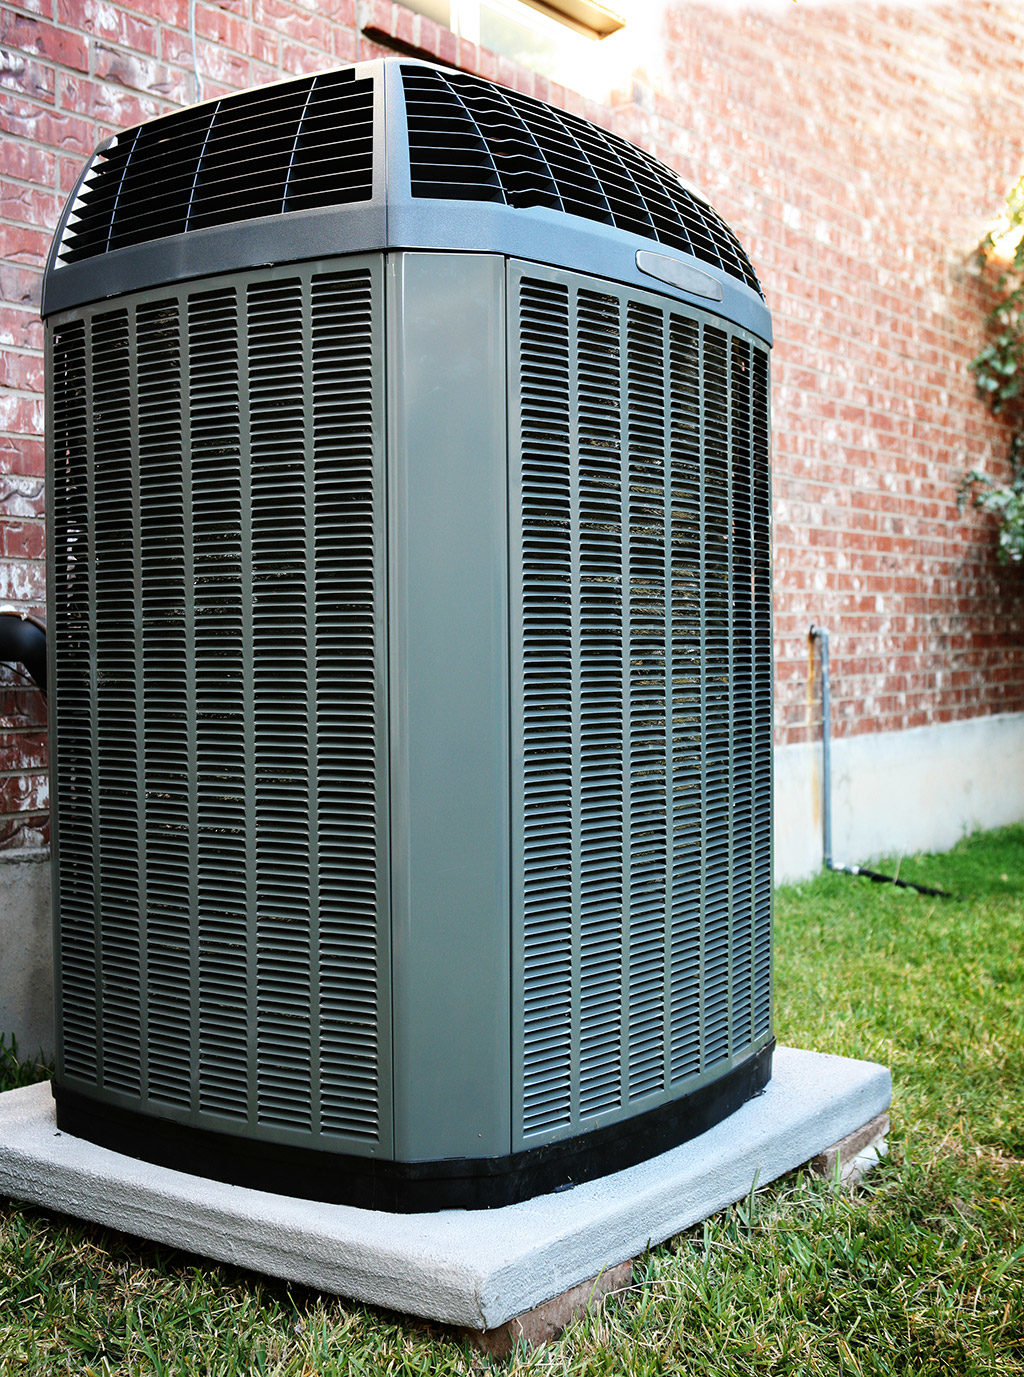 Standard vs. High Efficiency Air Conditioning | Air Conditioning Service in Fort Worth, TX